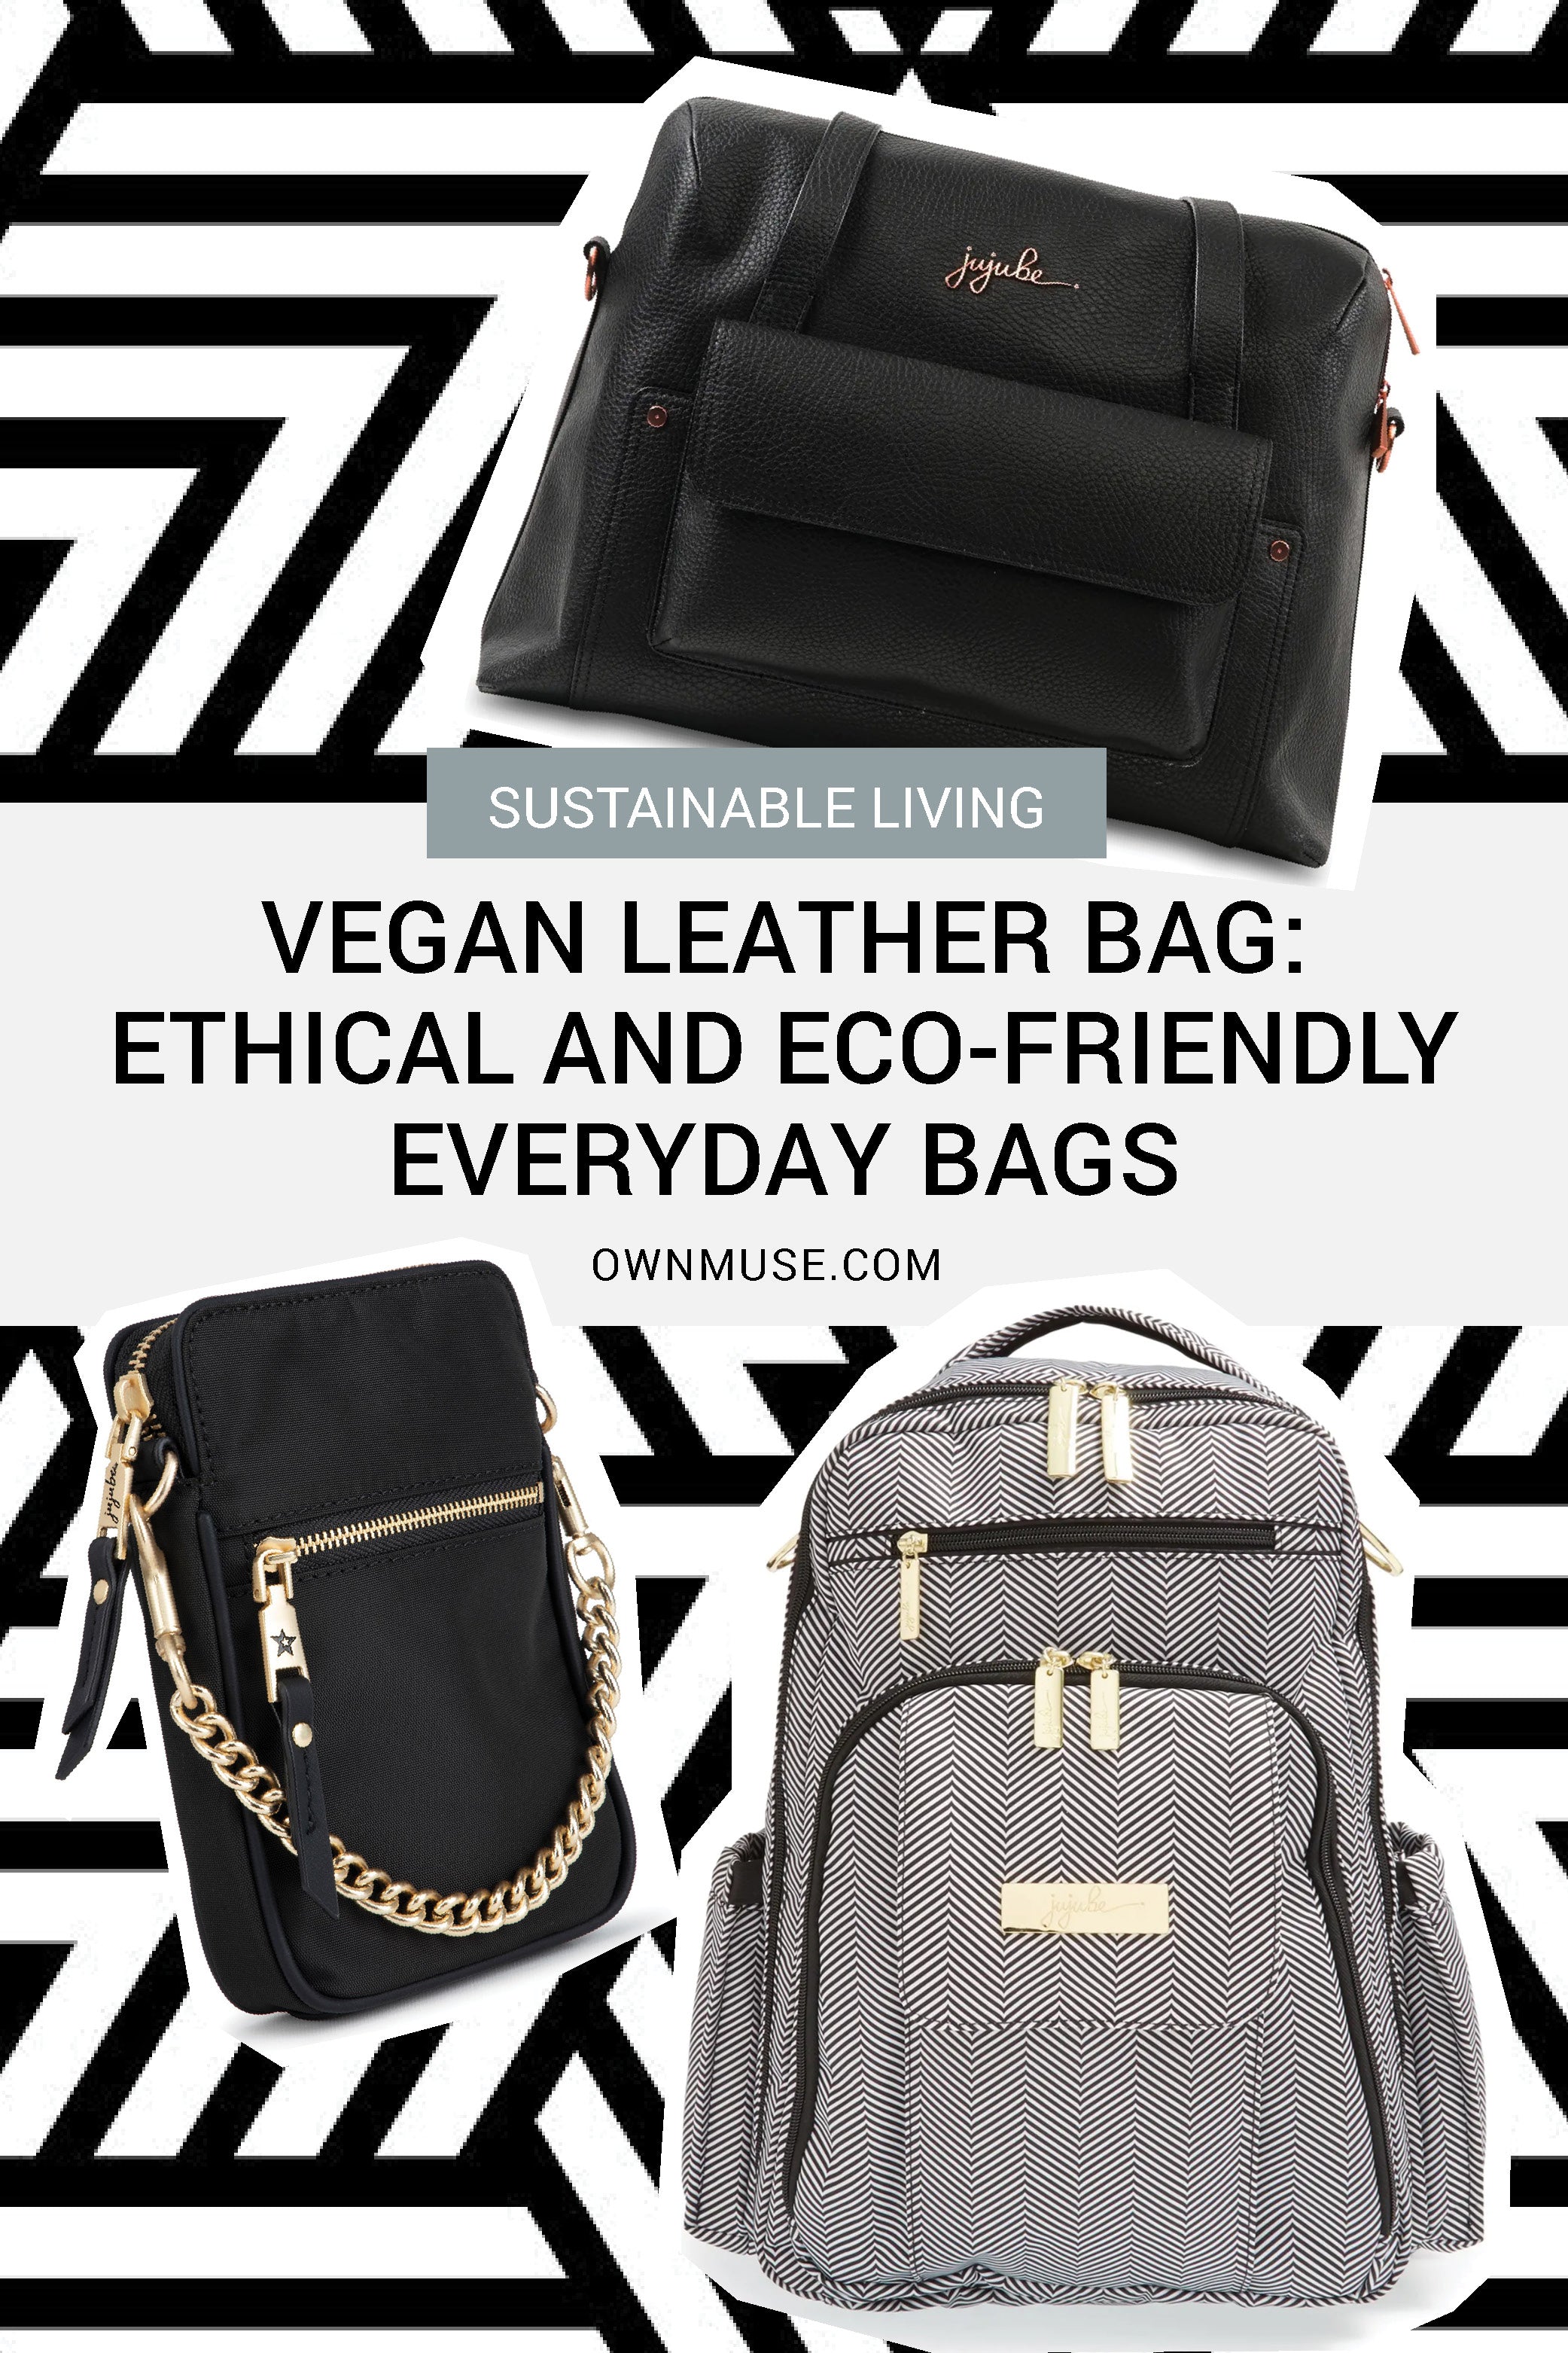 Vegan Leather Bags: An Everyday Fashion Bag that is Ethical and Eco-friendly